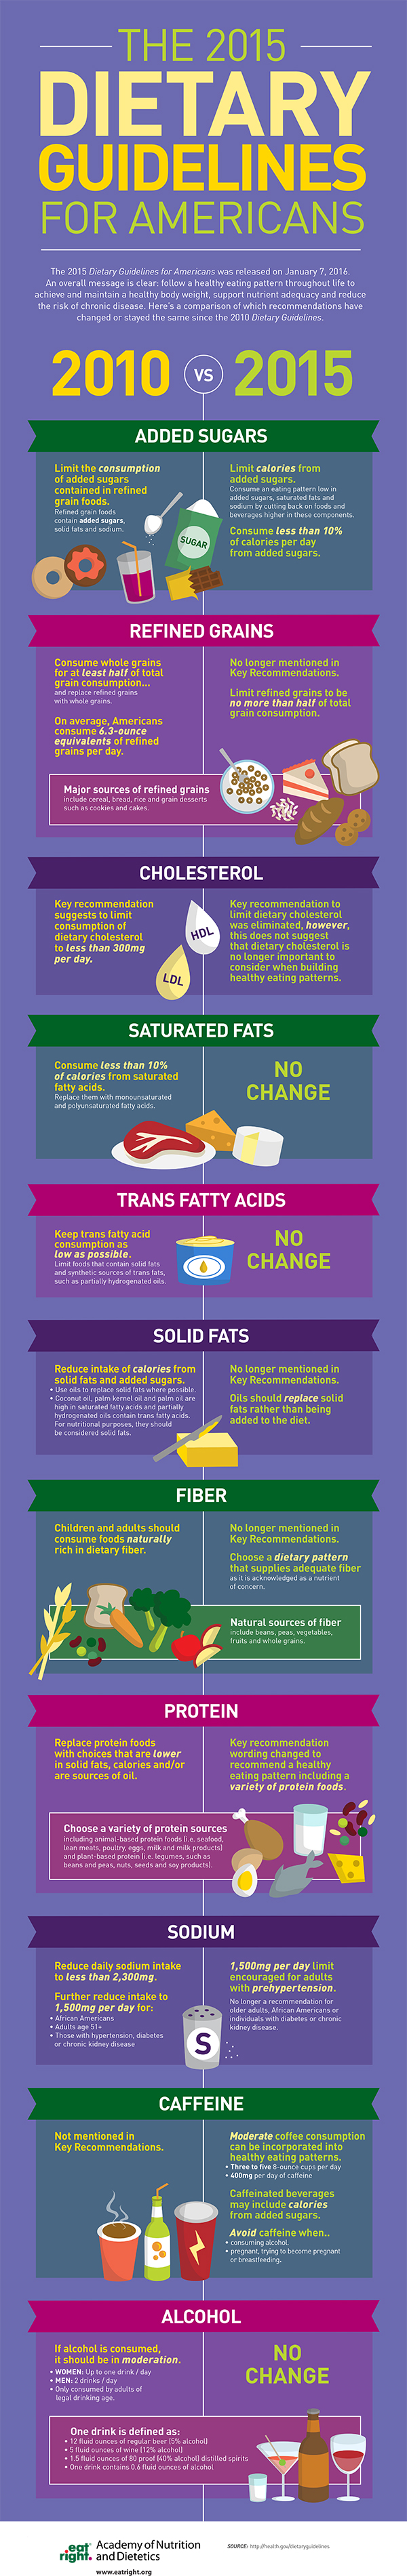 Dietary Guidelines infographic